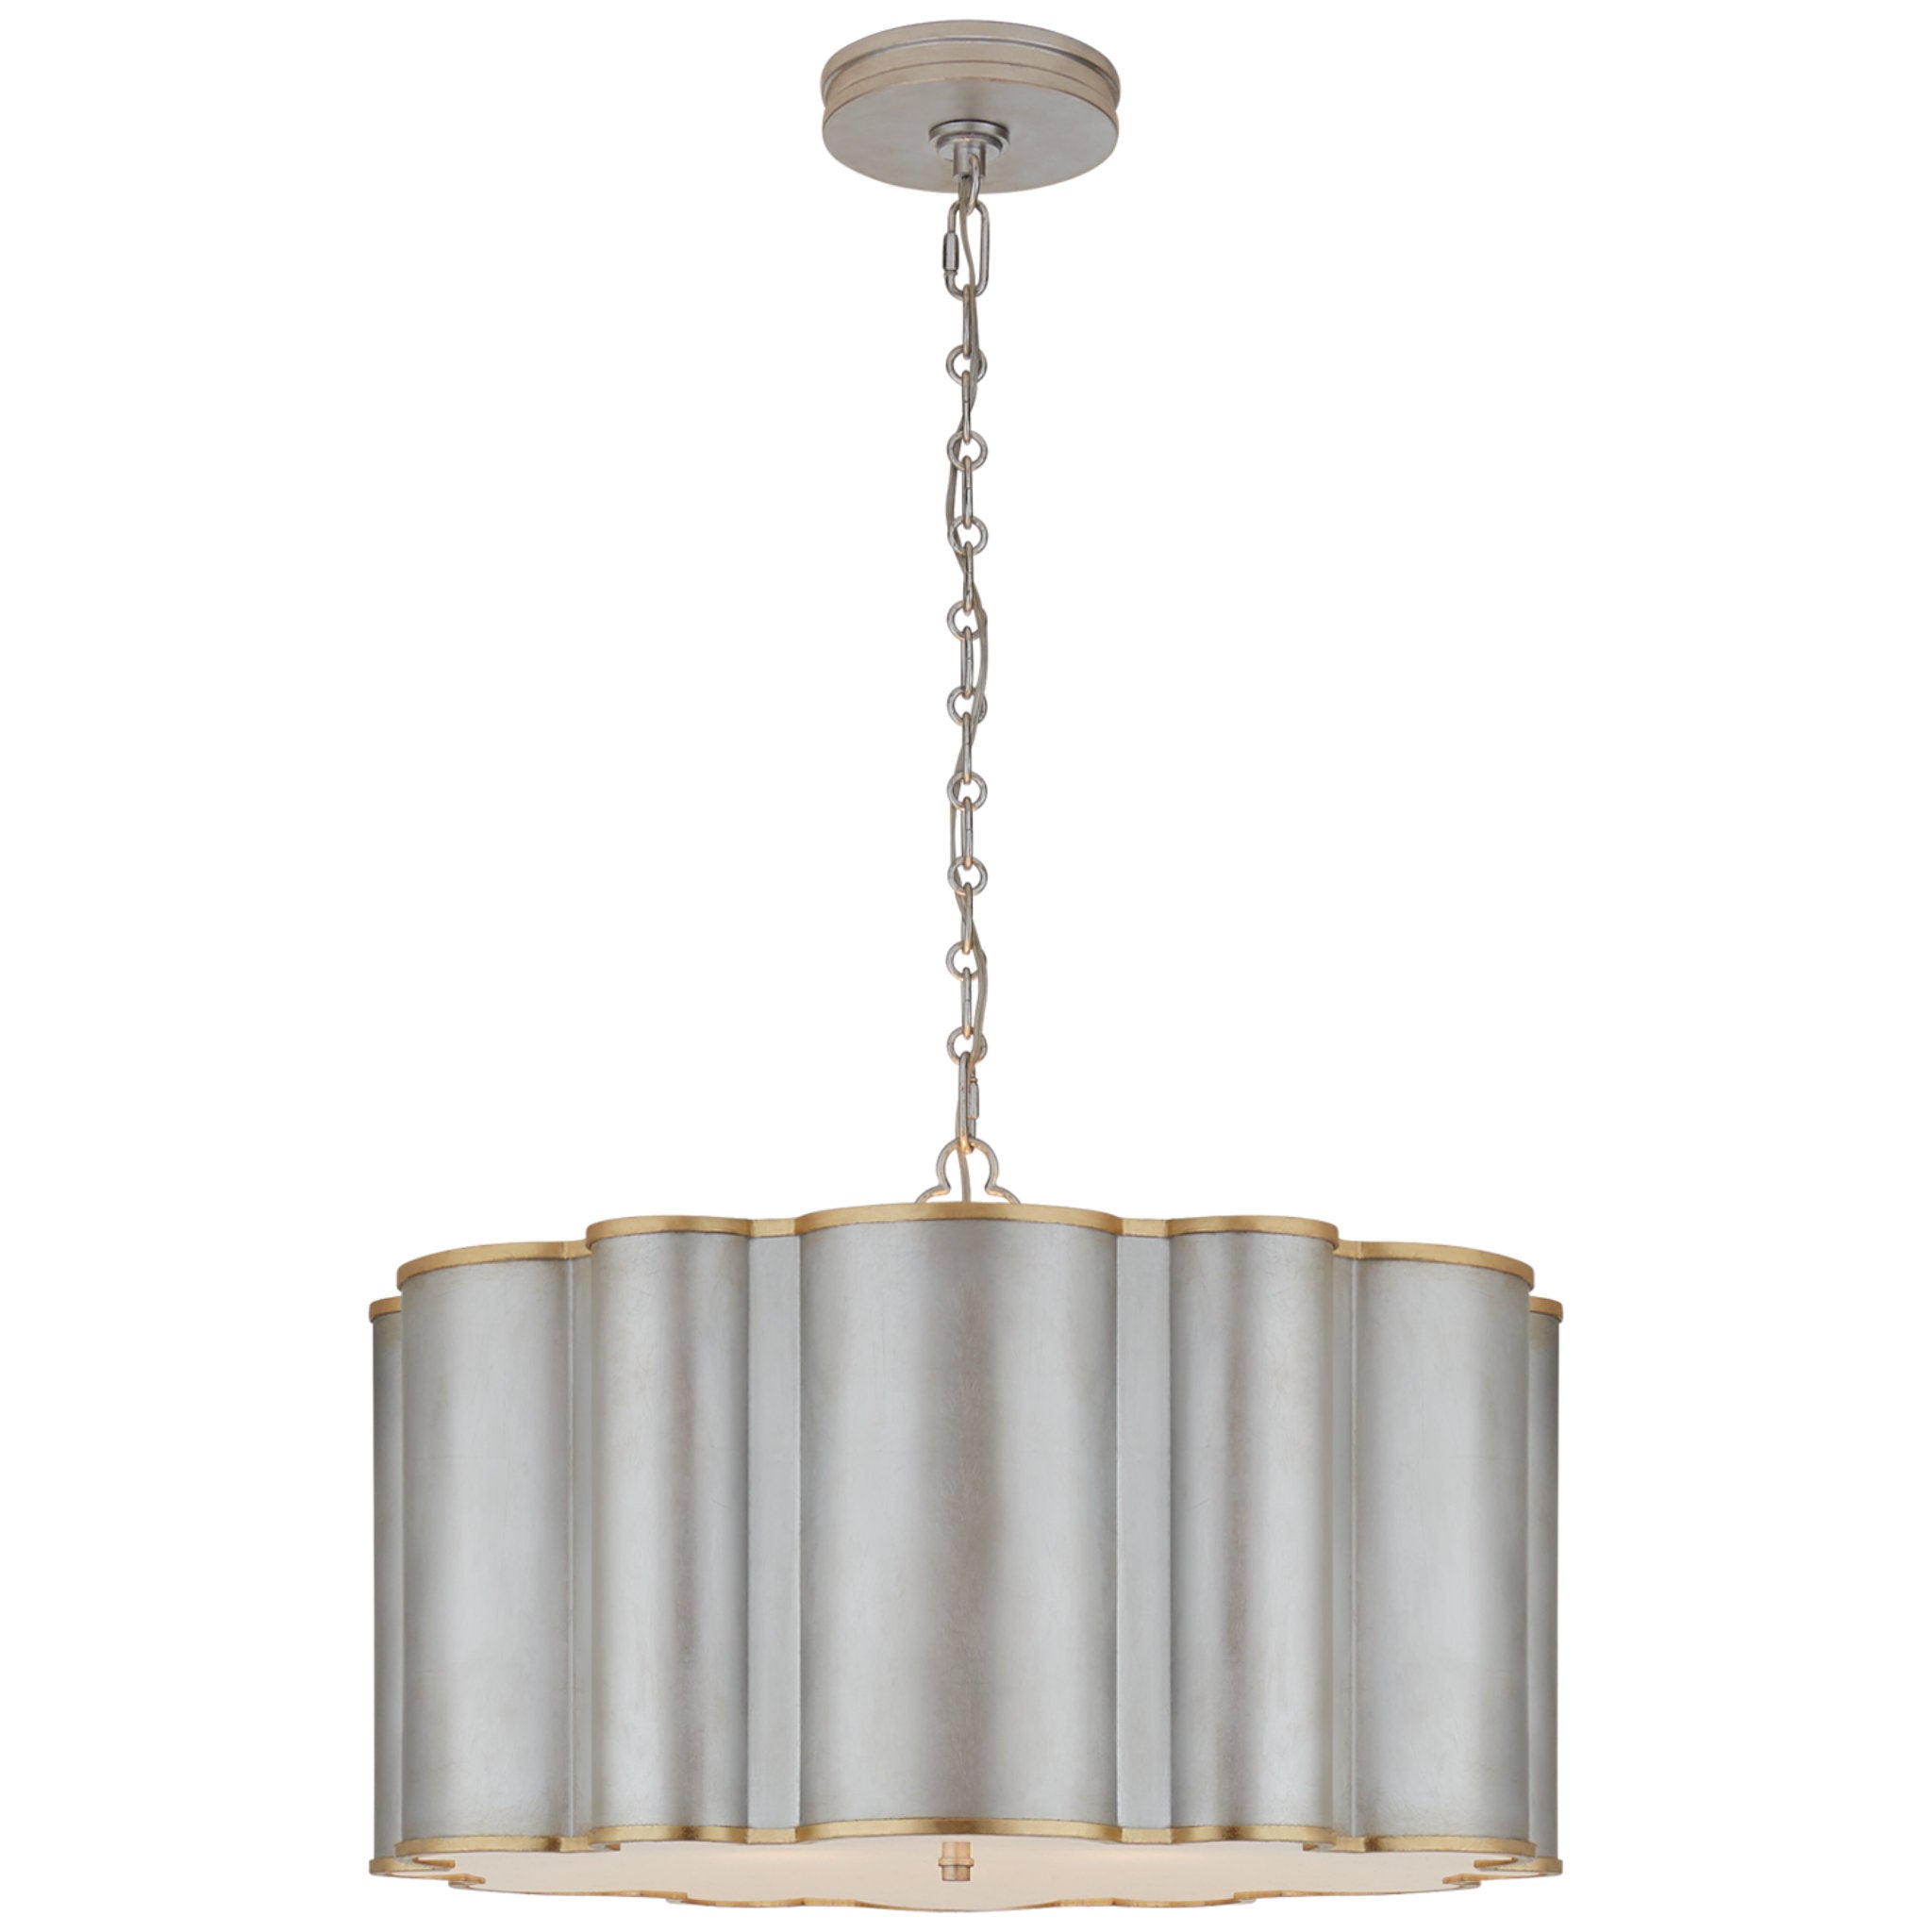 Alexa Hampton Markos Large Hanging Shade in Burnished Silver Leaf and Gild with Frosted Acrylic